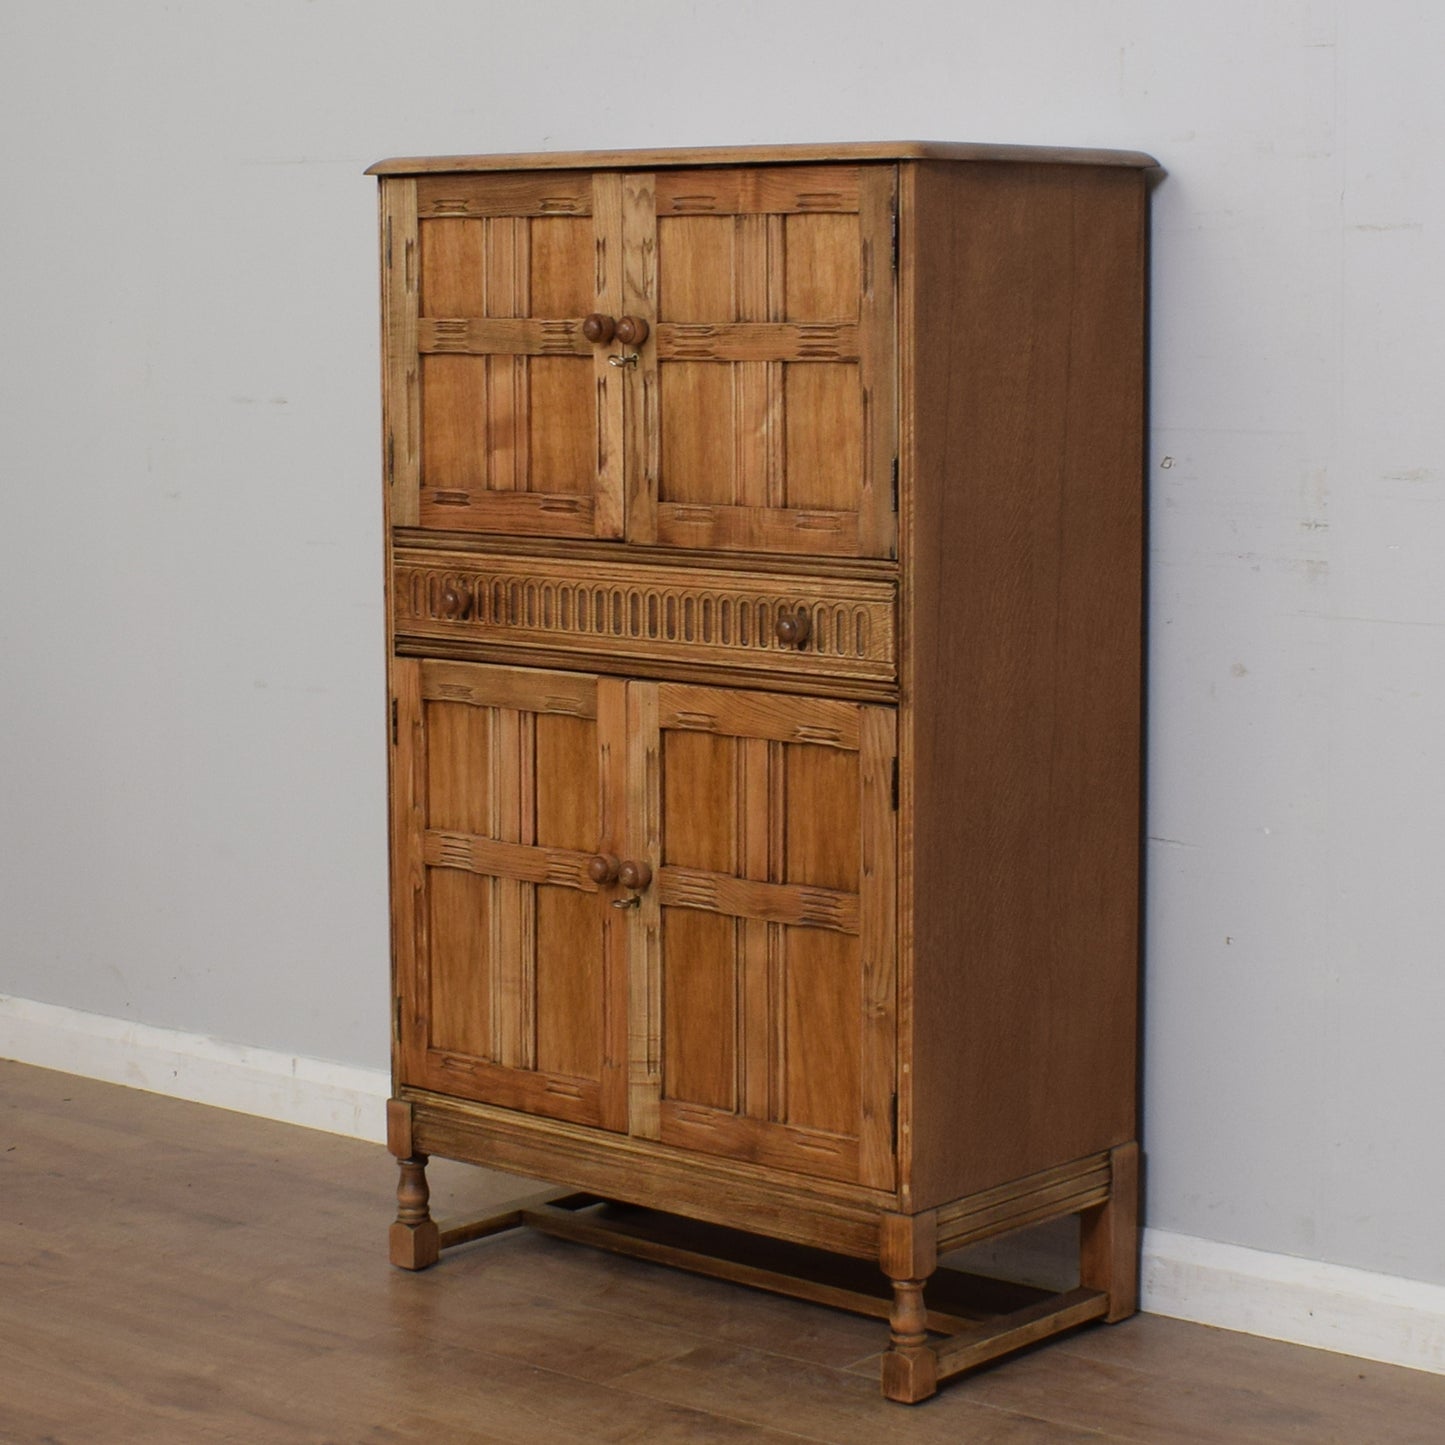 Priory Drinks Cabinet